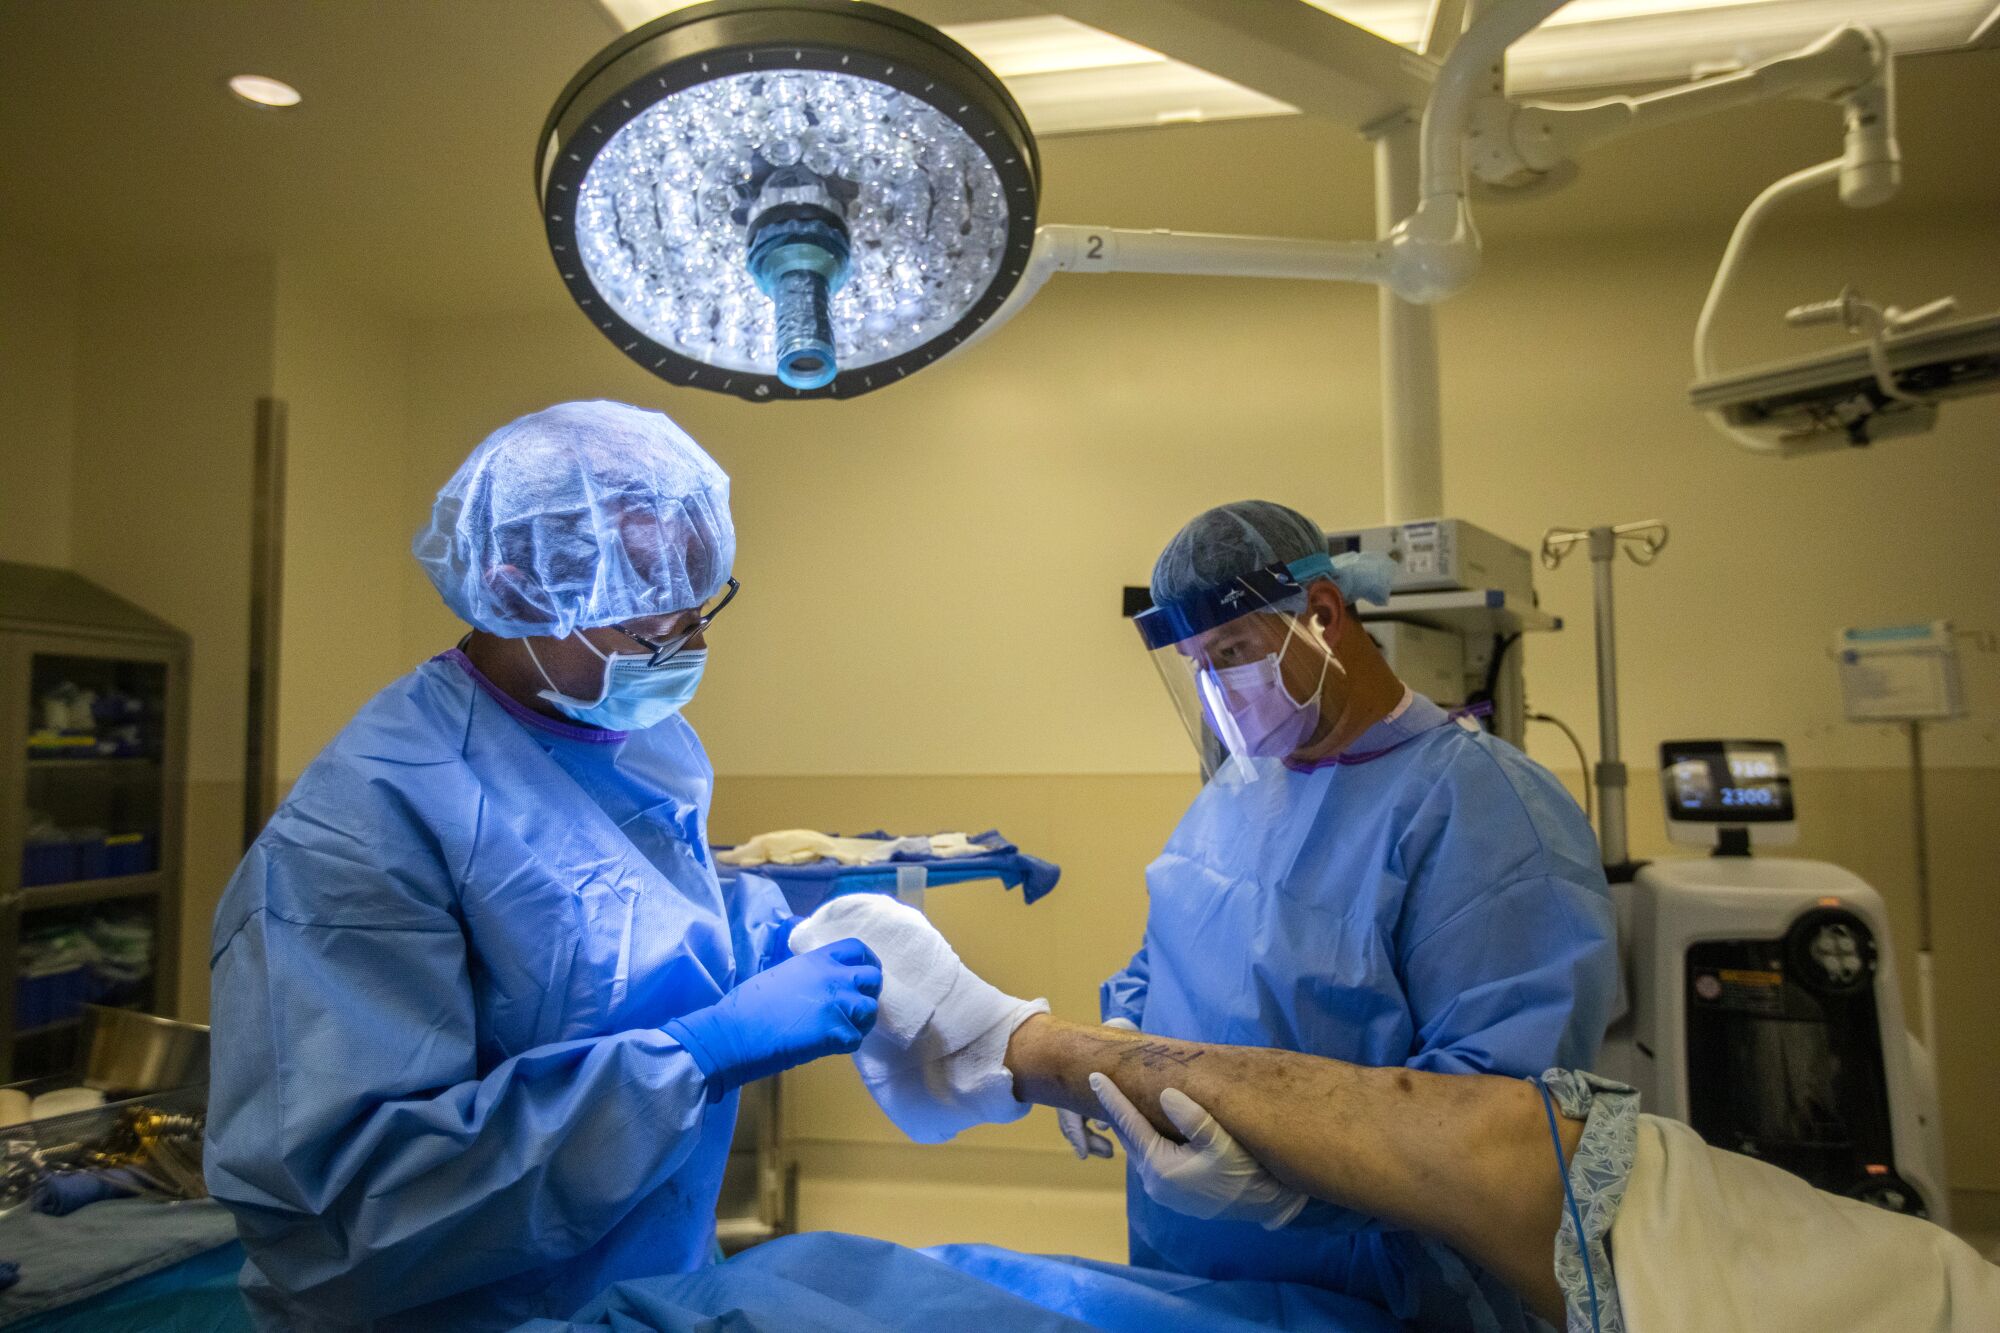 Dr. Myron Hall, left, and Ali Yousufzad, a surgical assistant, right, bandage Tony Zamora's foot after the surgery.